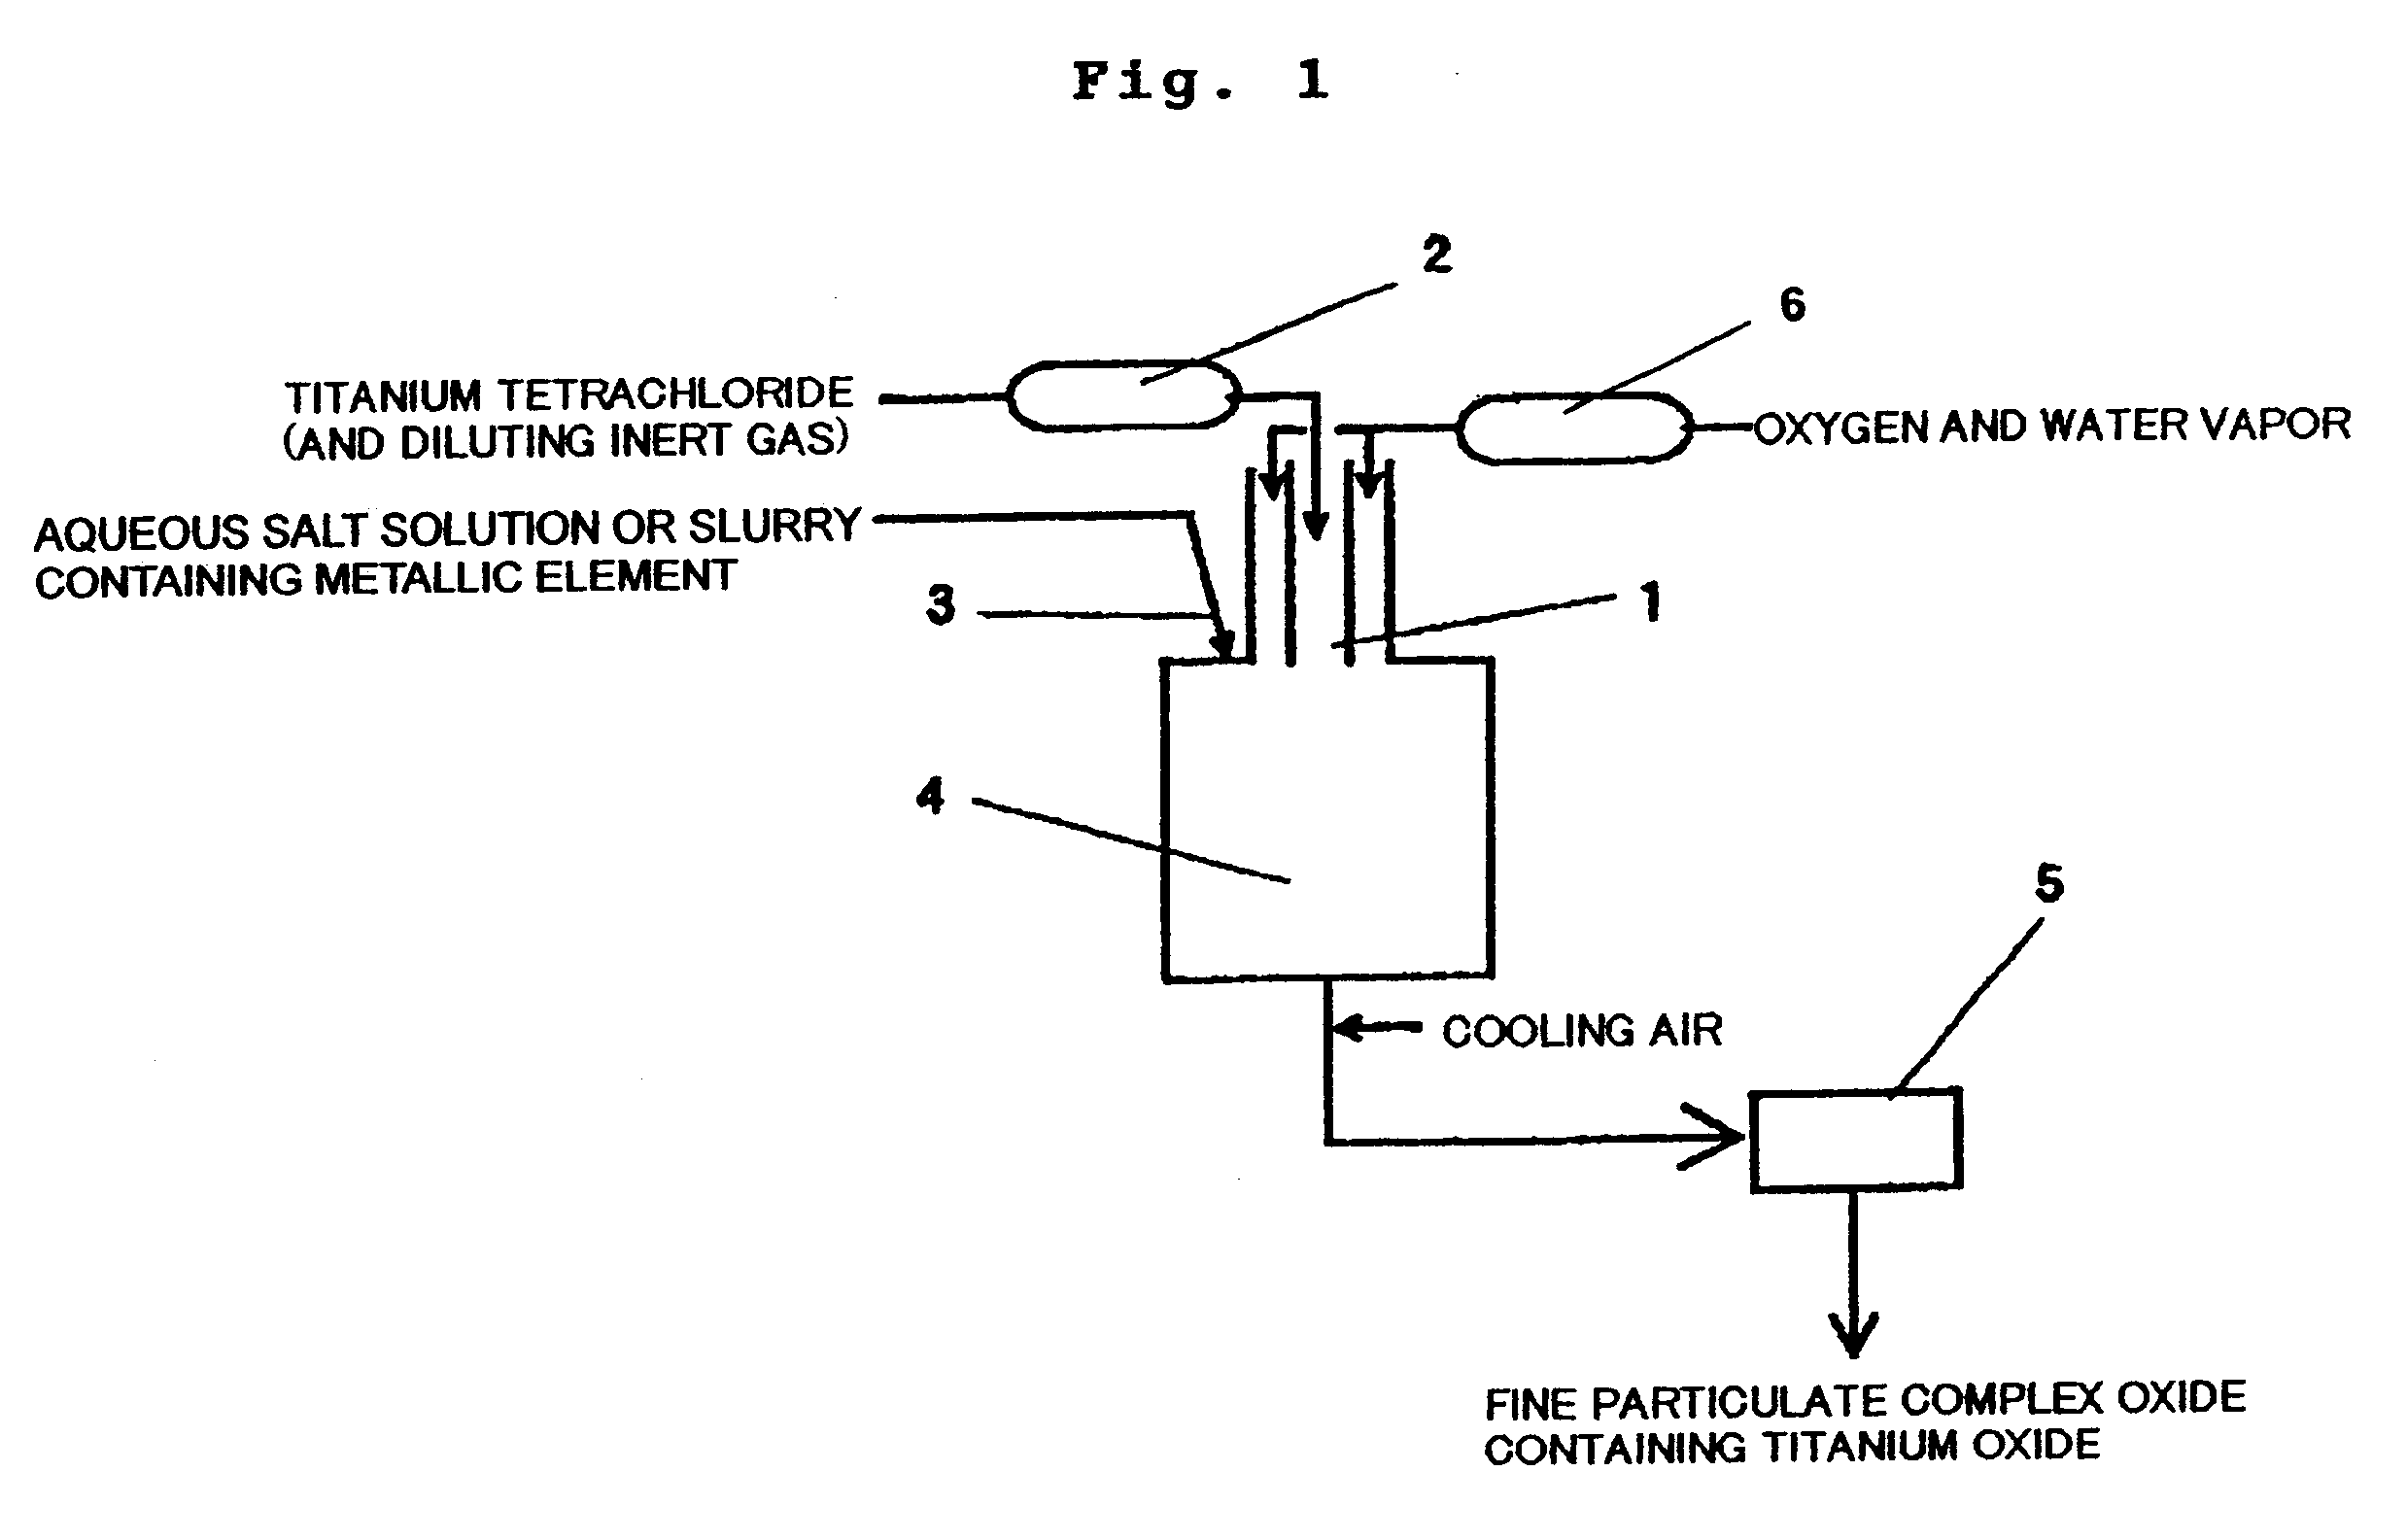 Production process for ultrafine particulate complex oxide containing titanium oxide